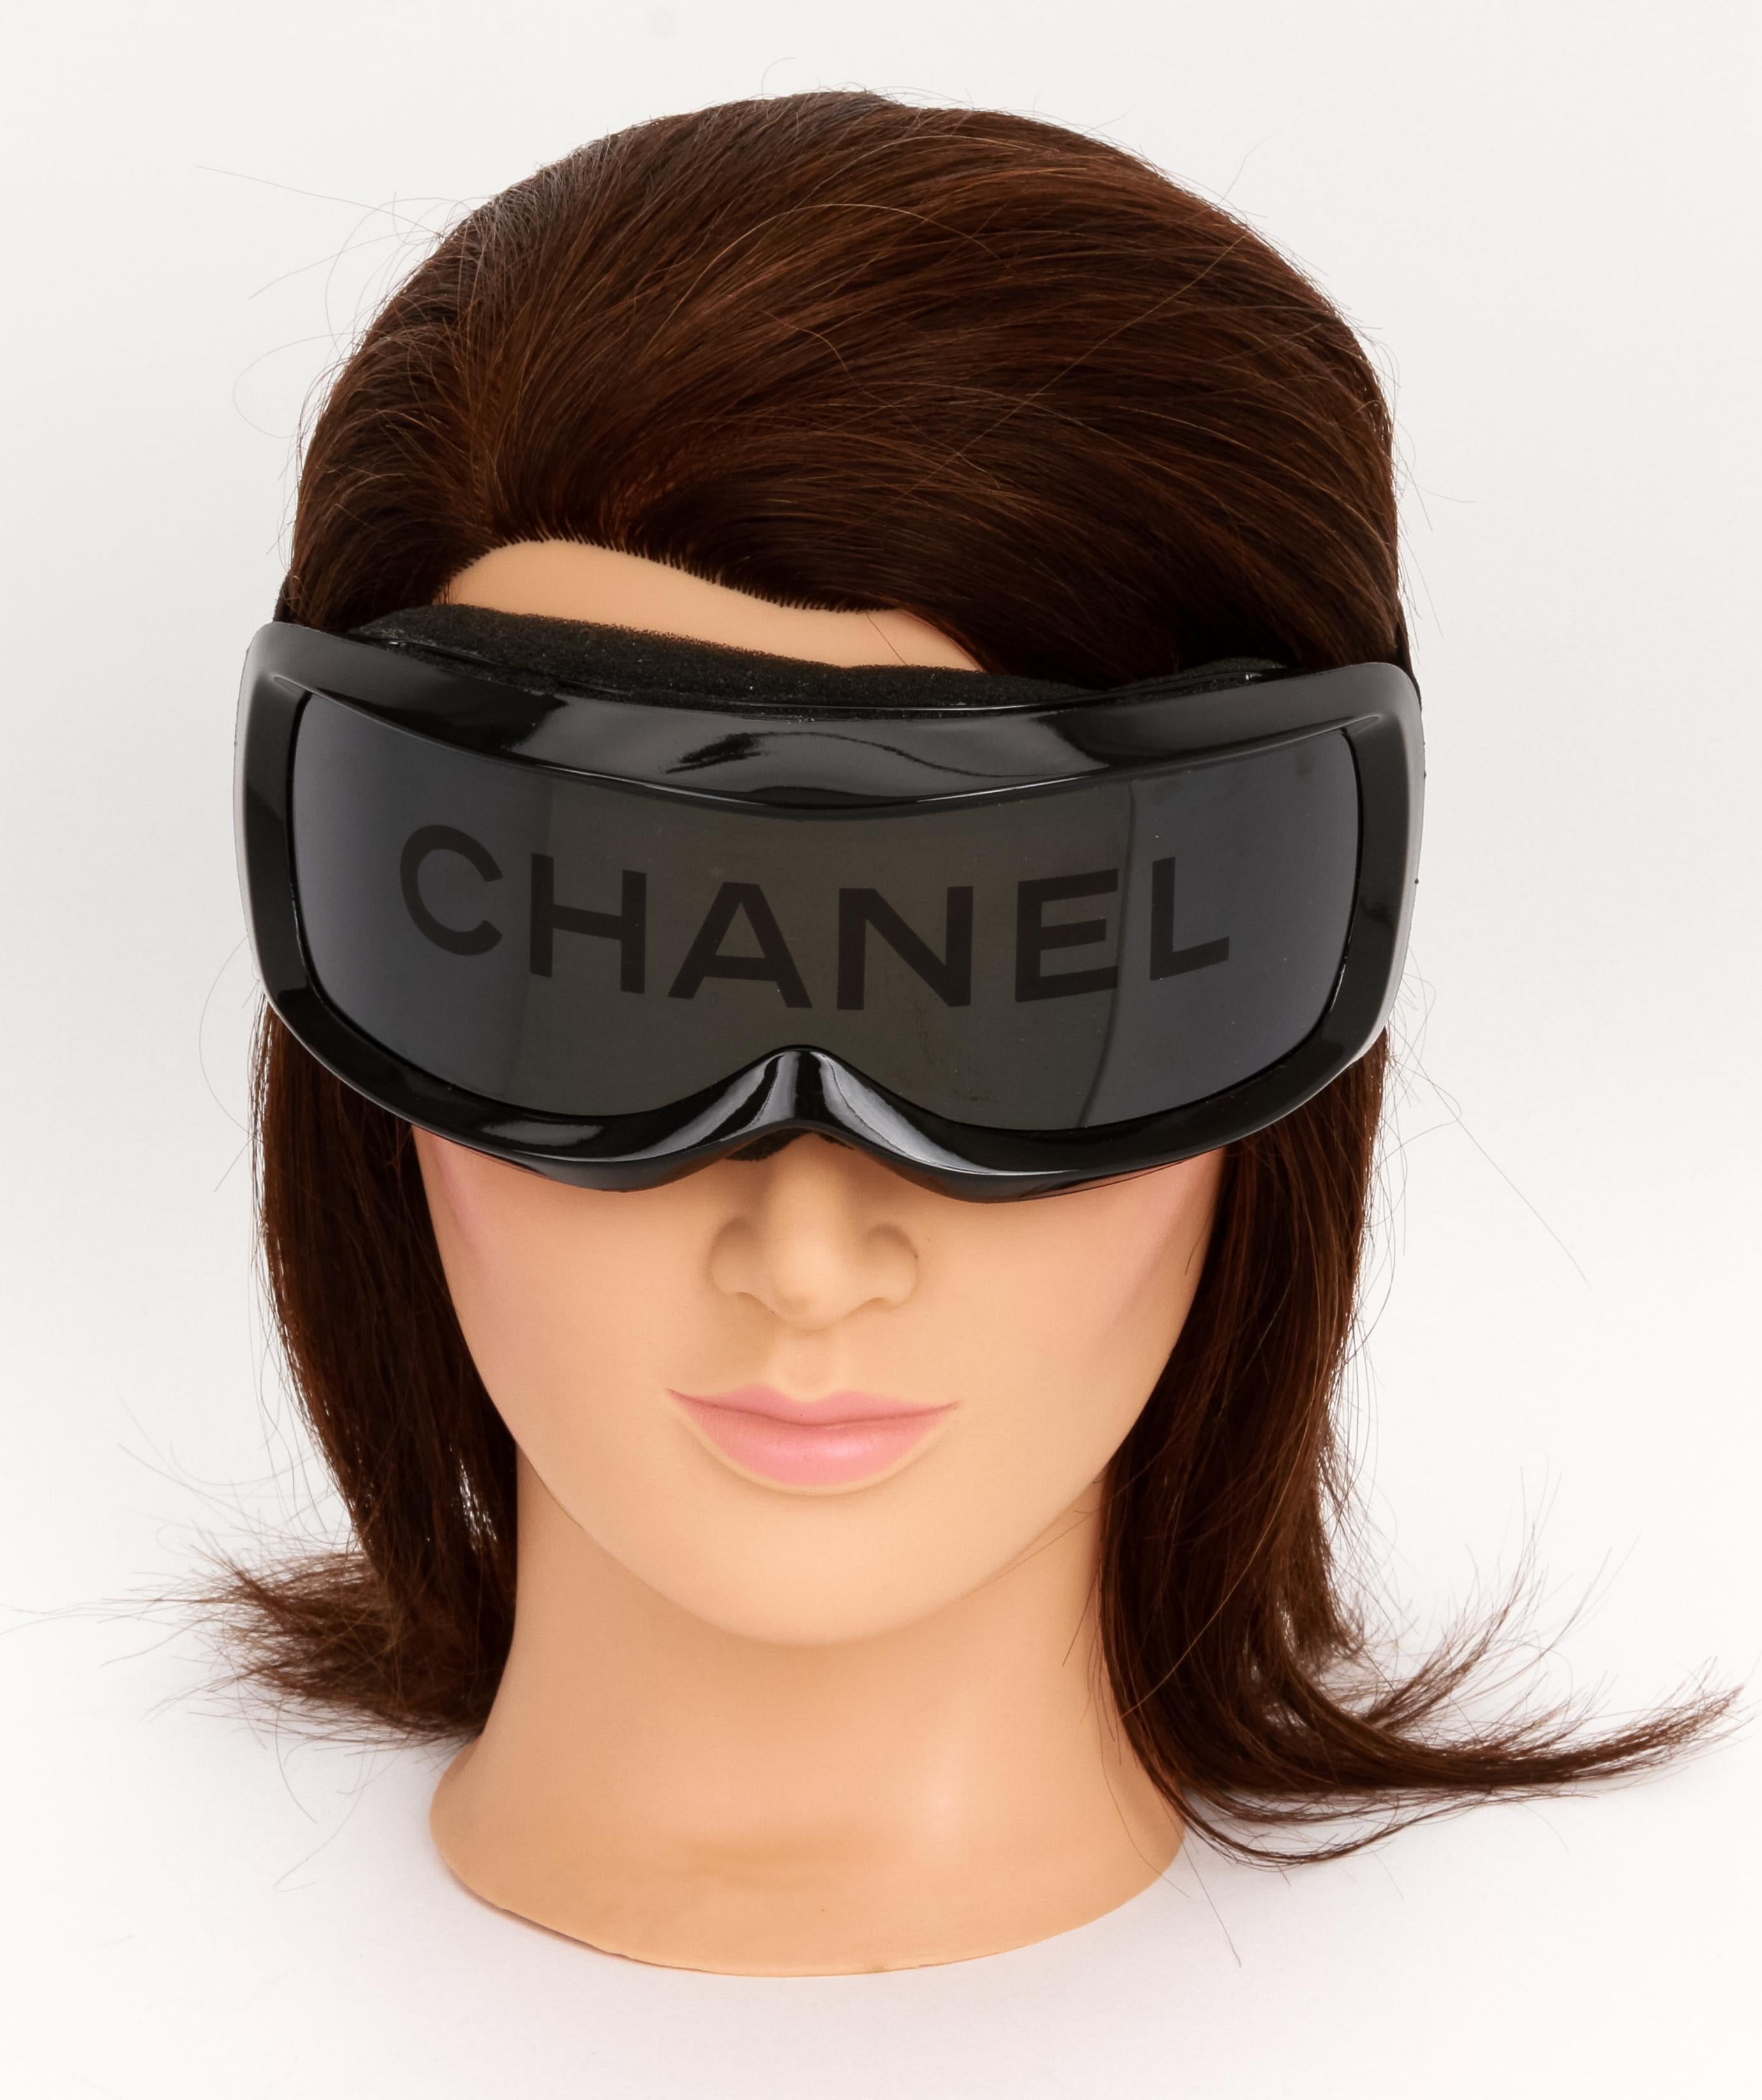 Chanel Ski Goggles with CHANEL across front. Full packaging included including original box. Condition Details : No scratches, very good condition. Earmuffs in the photo available in separate listing.